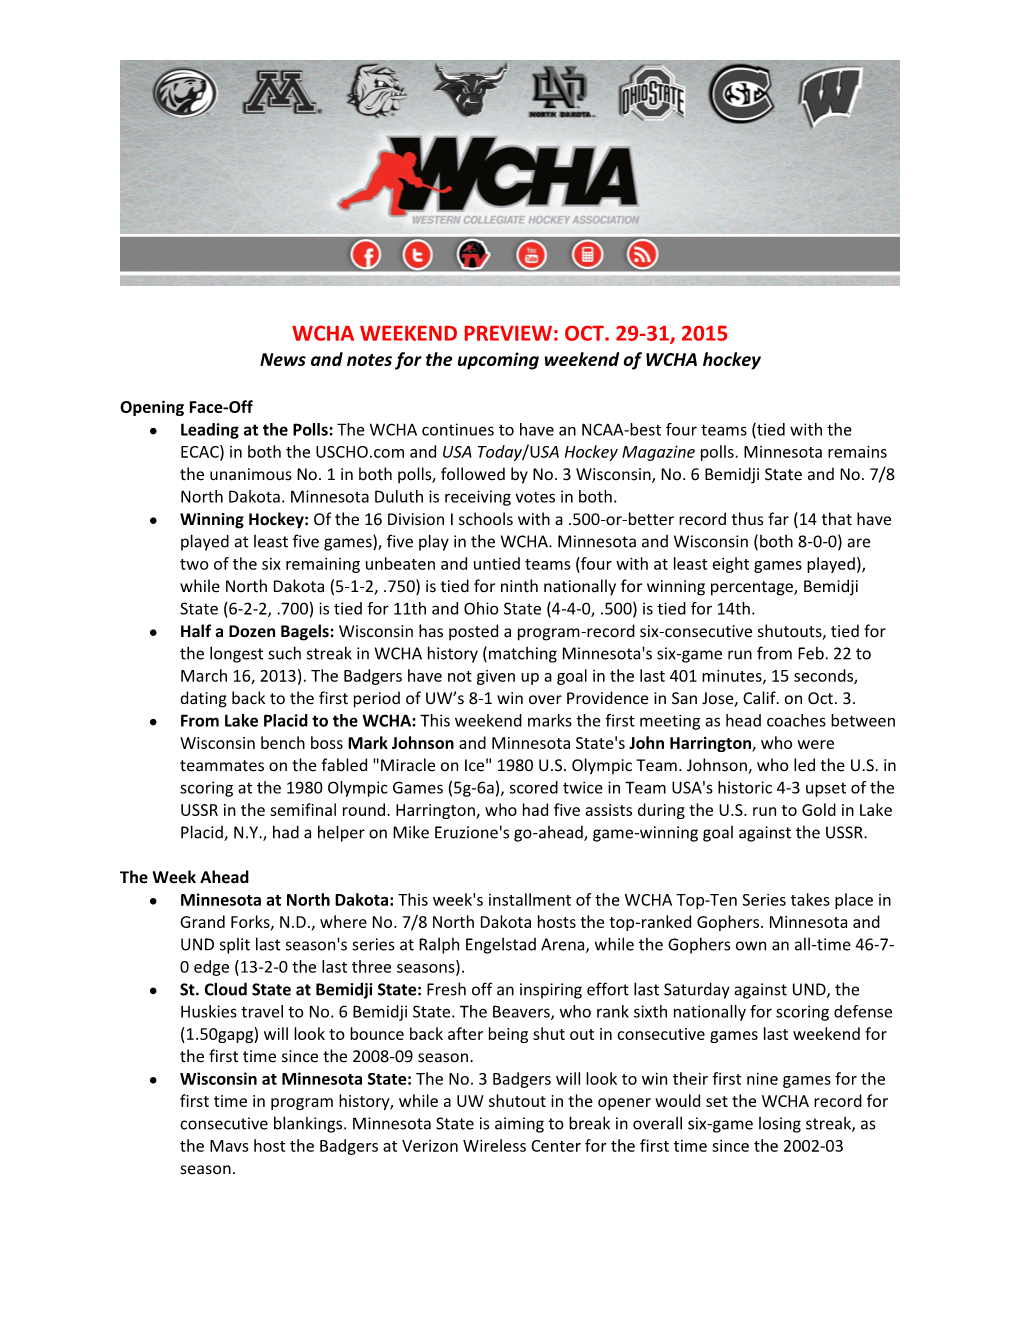 WCHA WEEKEND PREVIEW: OCT. 29-31, 2015 News and Notes for the Upcoming Weekend of WCHA Hockey